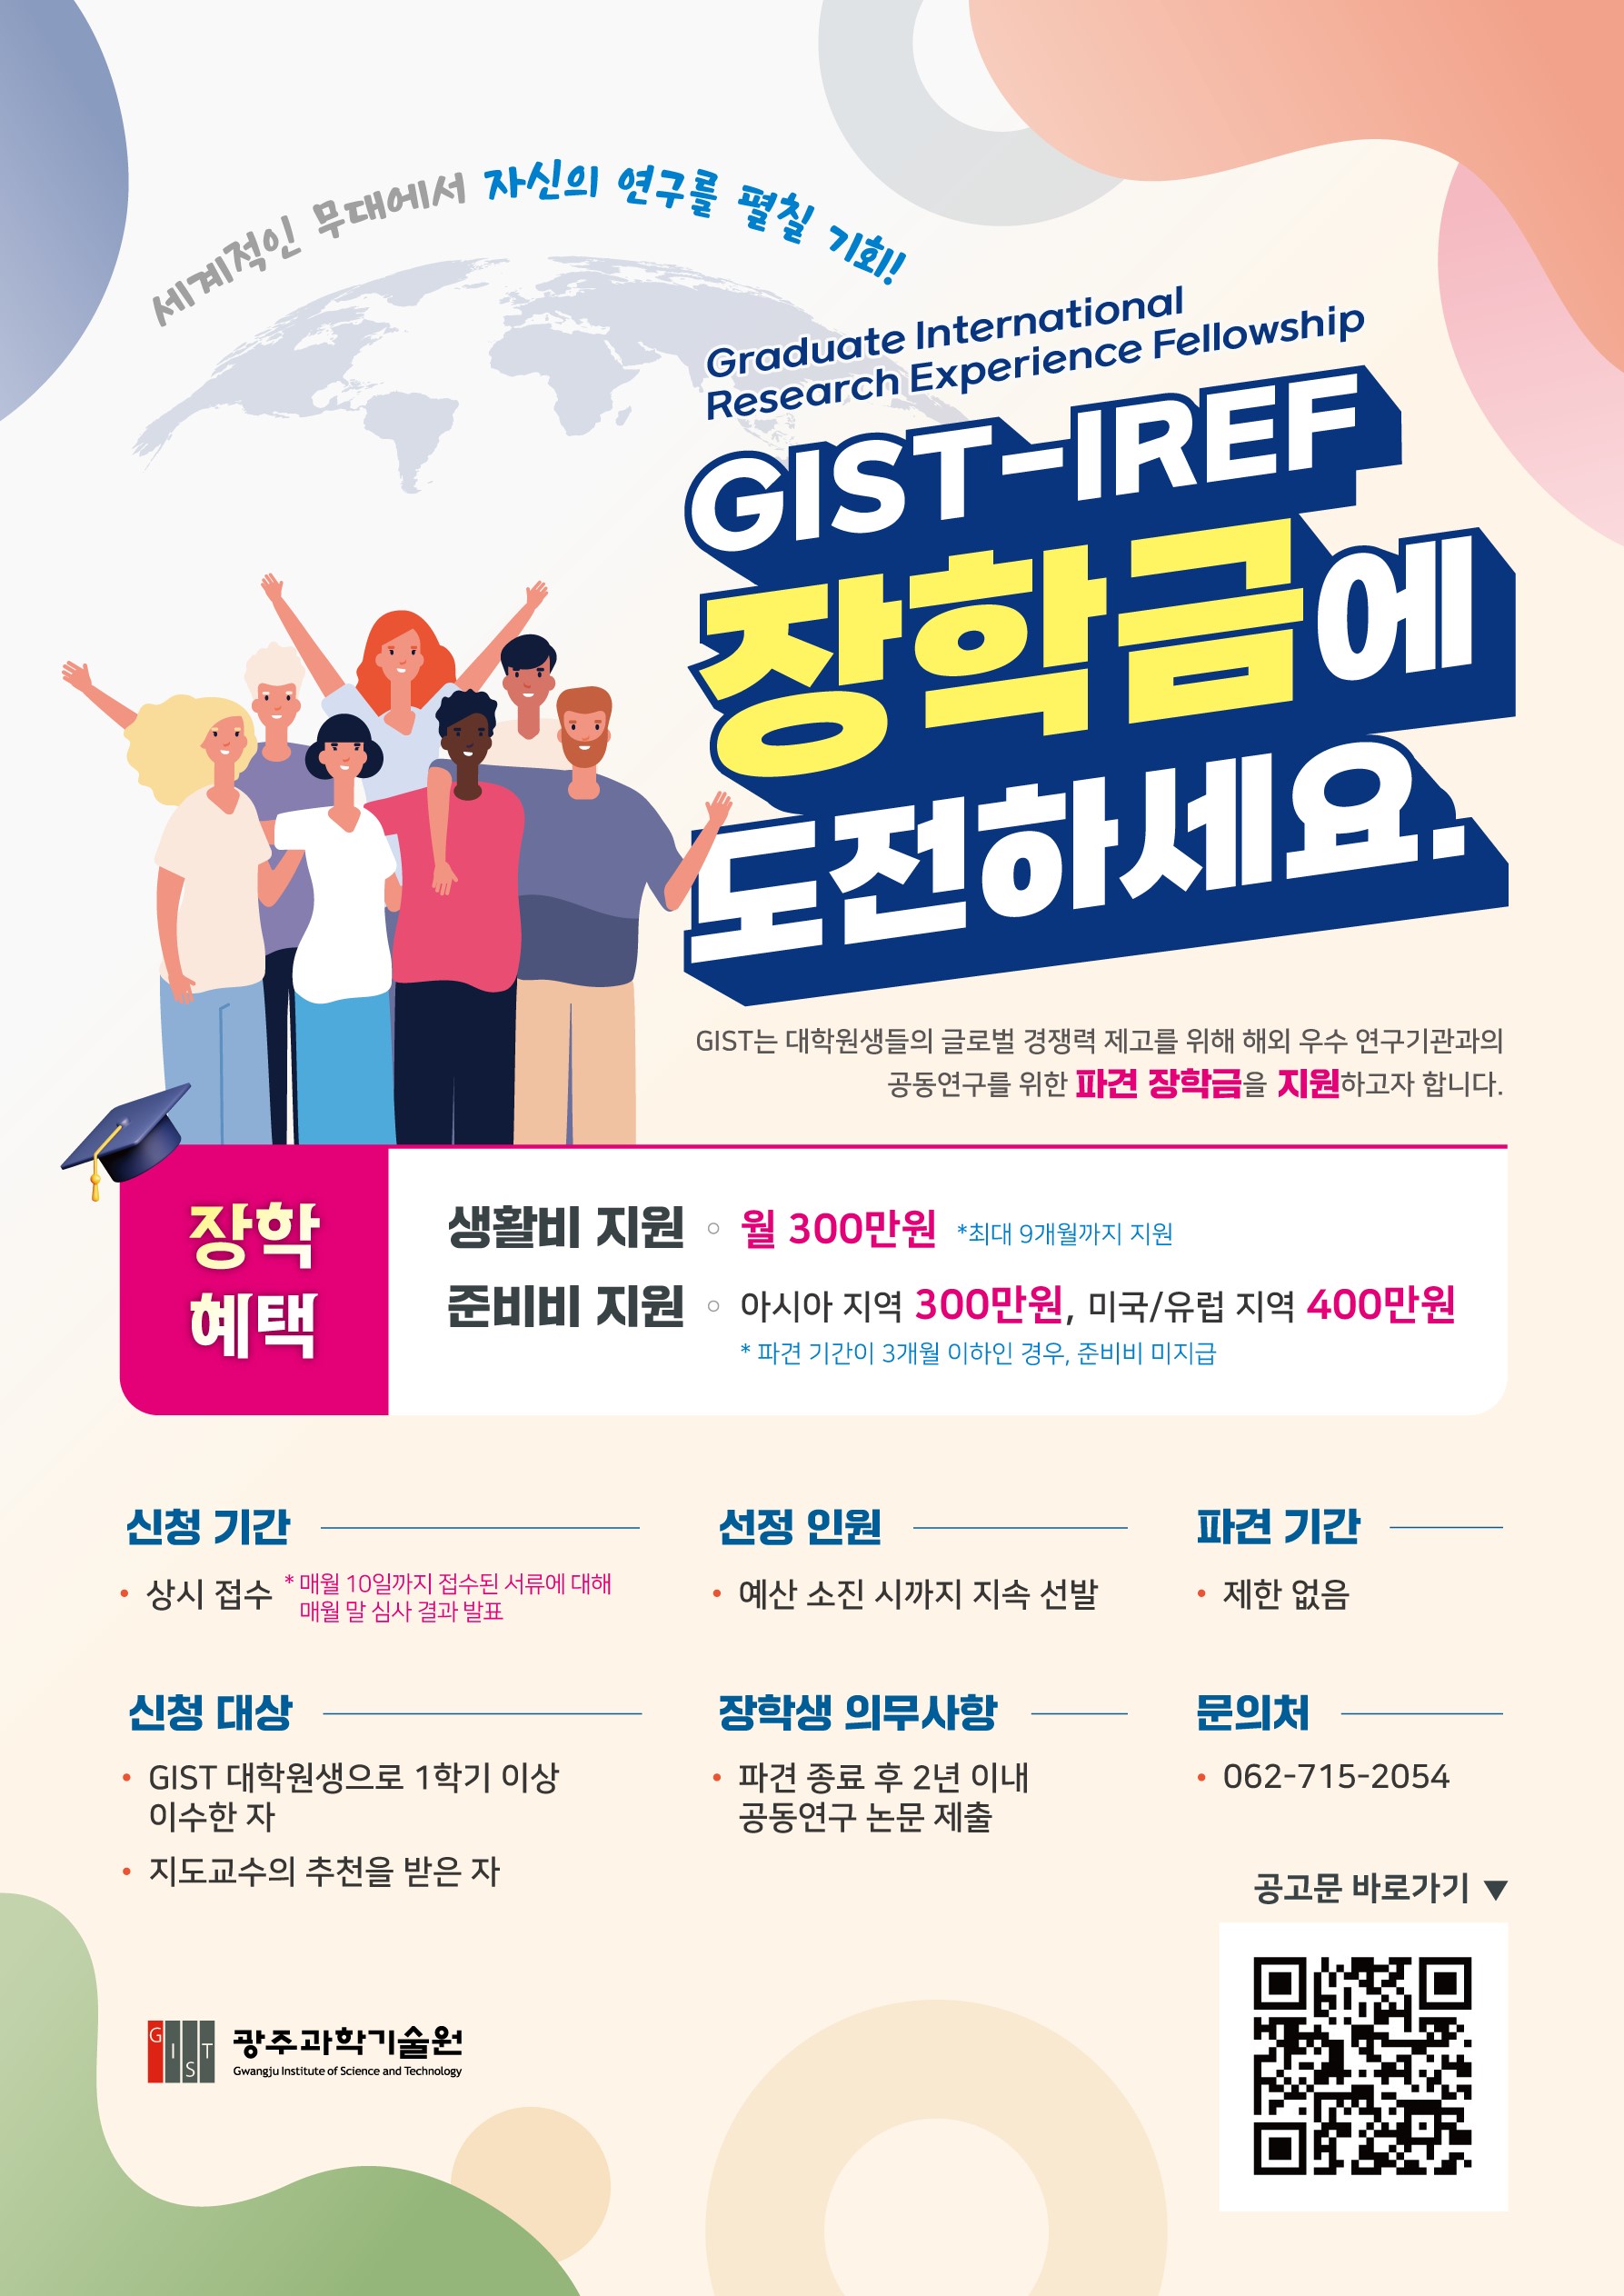 GIST sends graduate school scholarship students to overseas research institutes... 3 million won per month for 9 months to focus on research 이미지